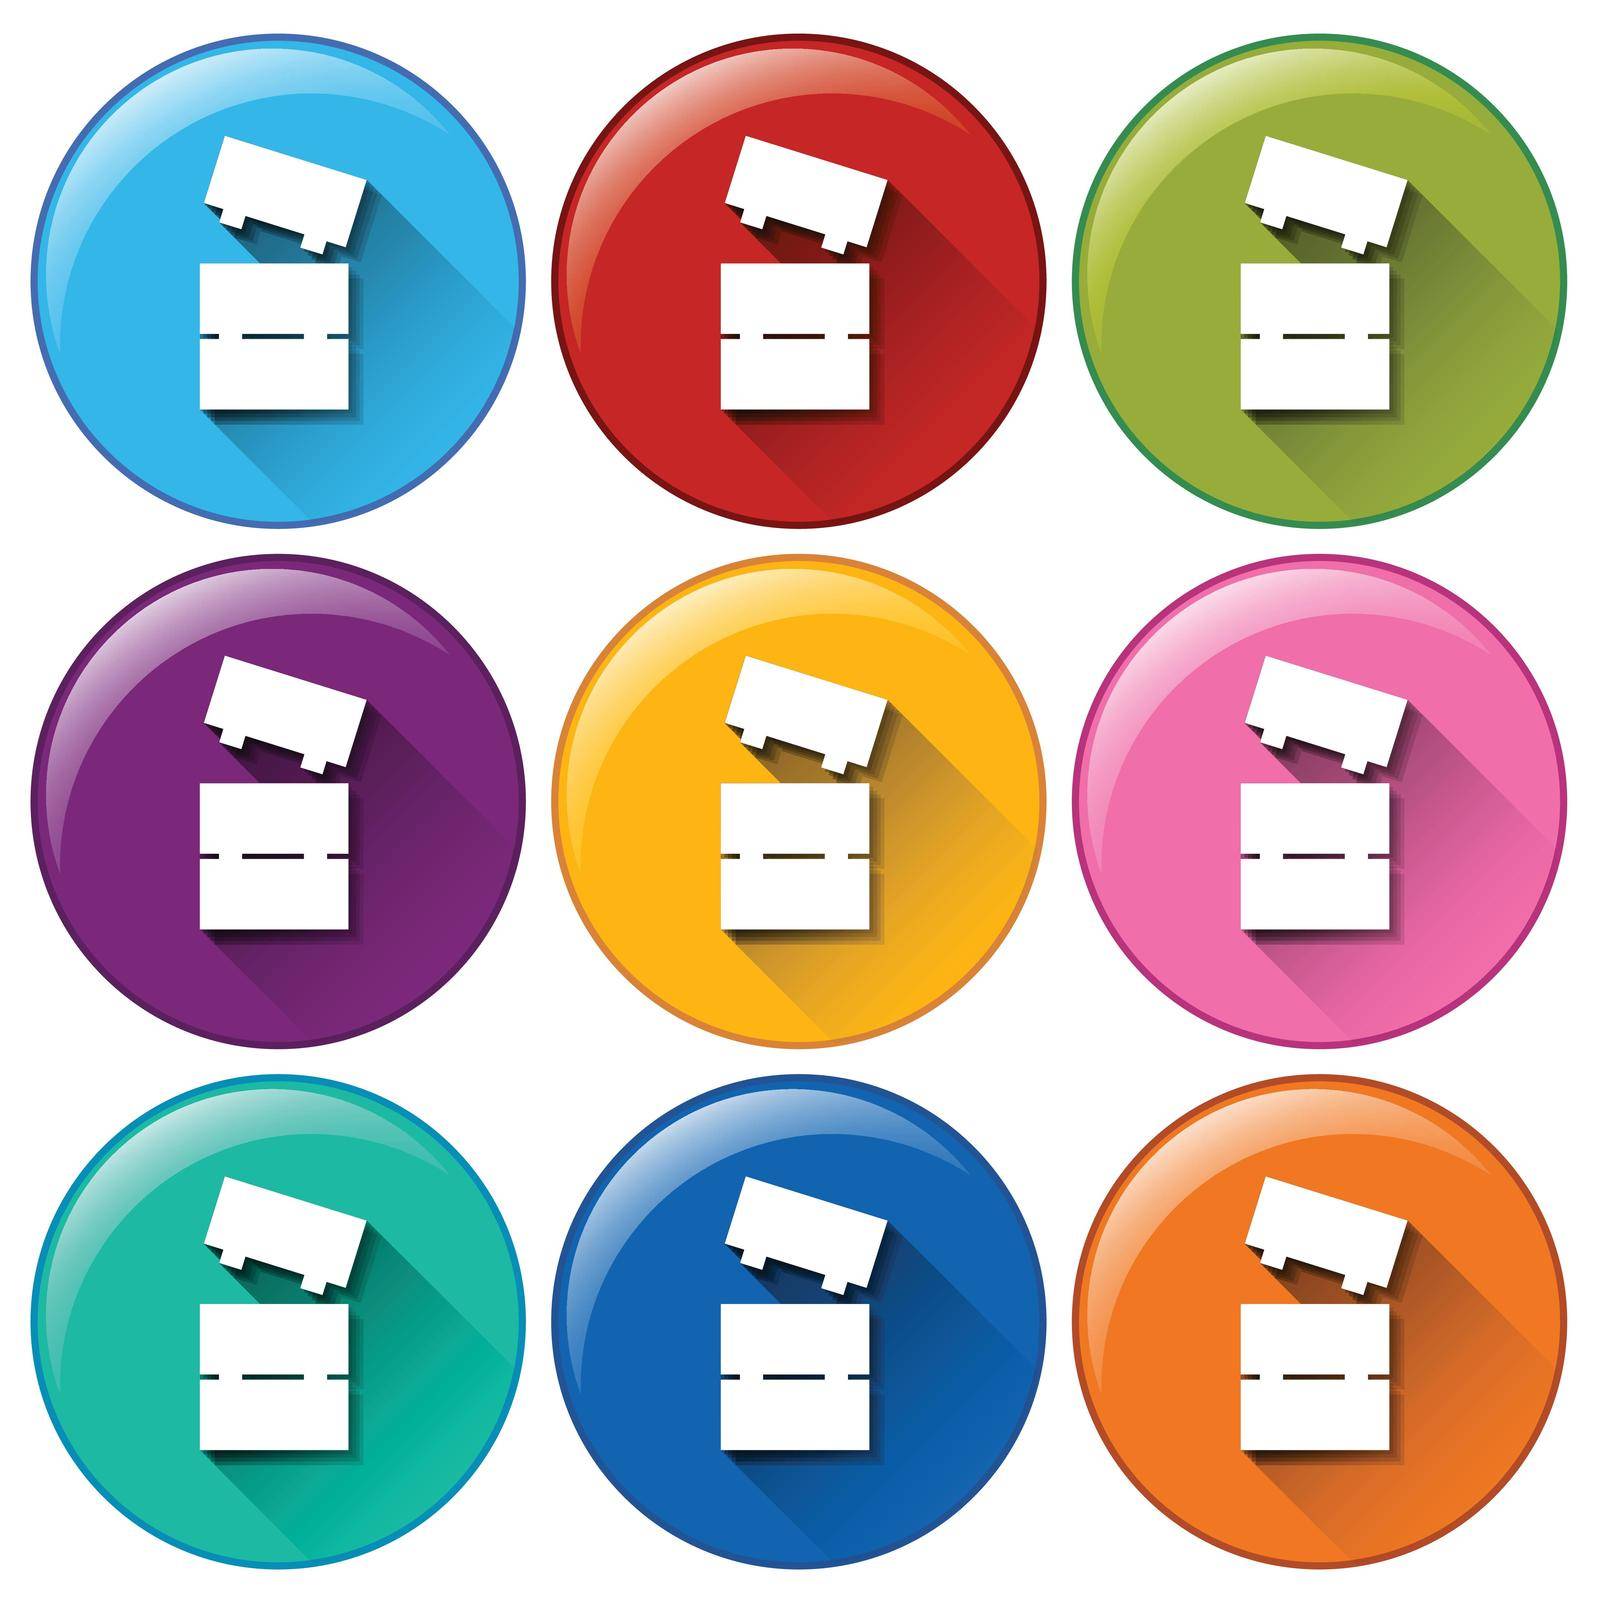 Buttons with toy blocks on a white background